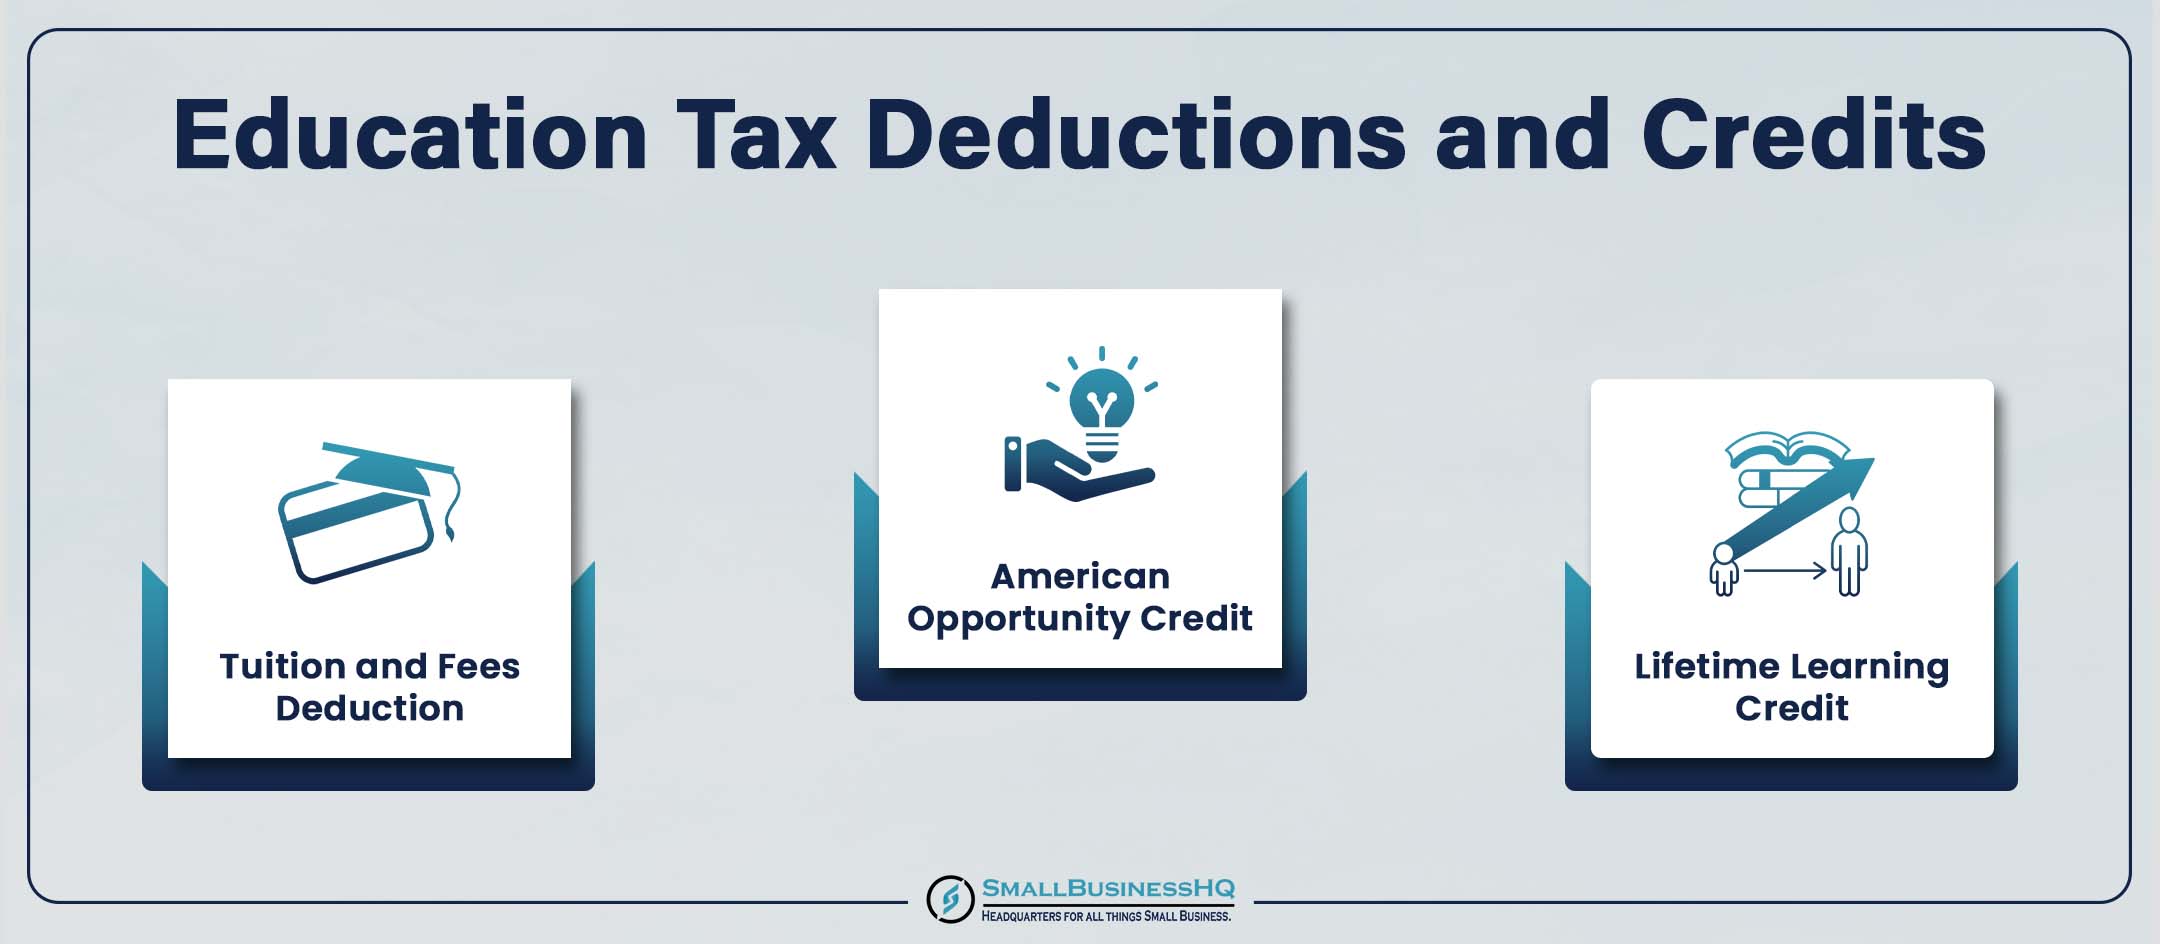 Education Tax Deductions and Credits